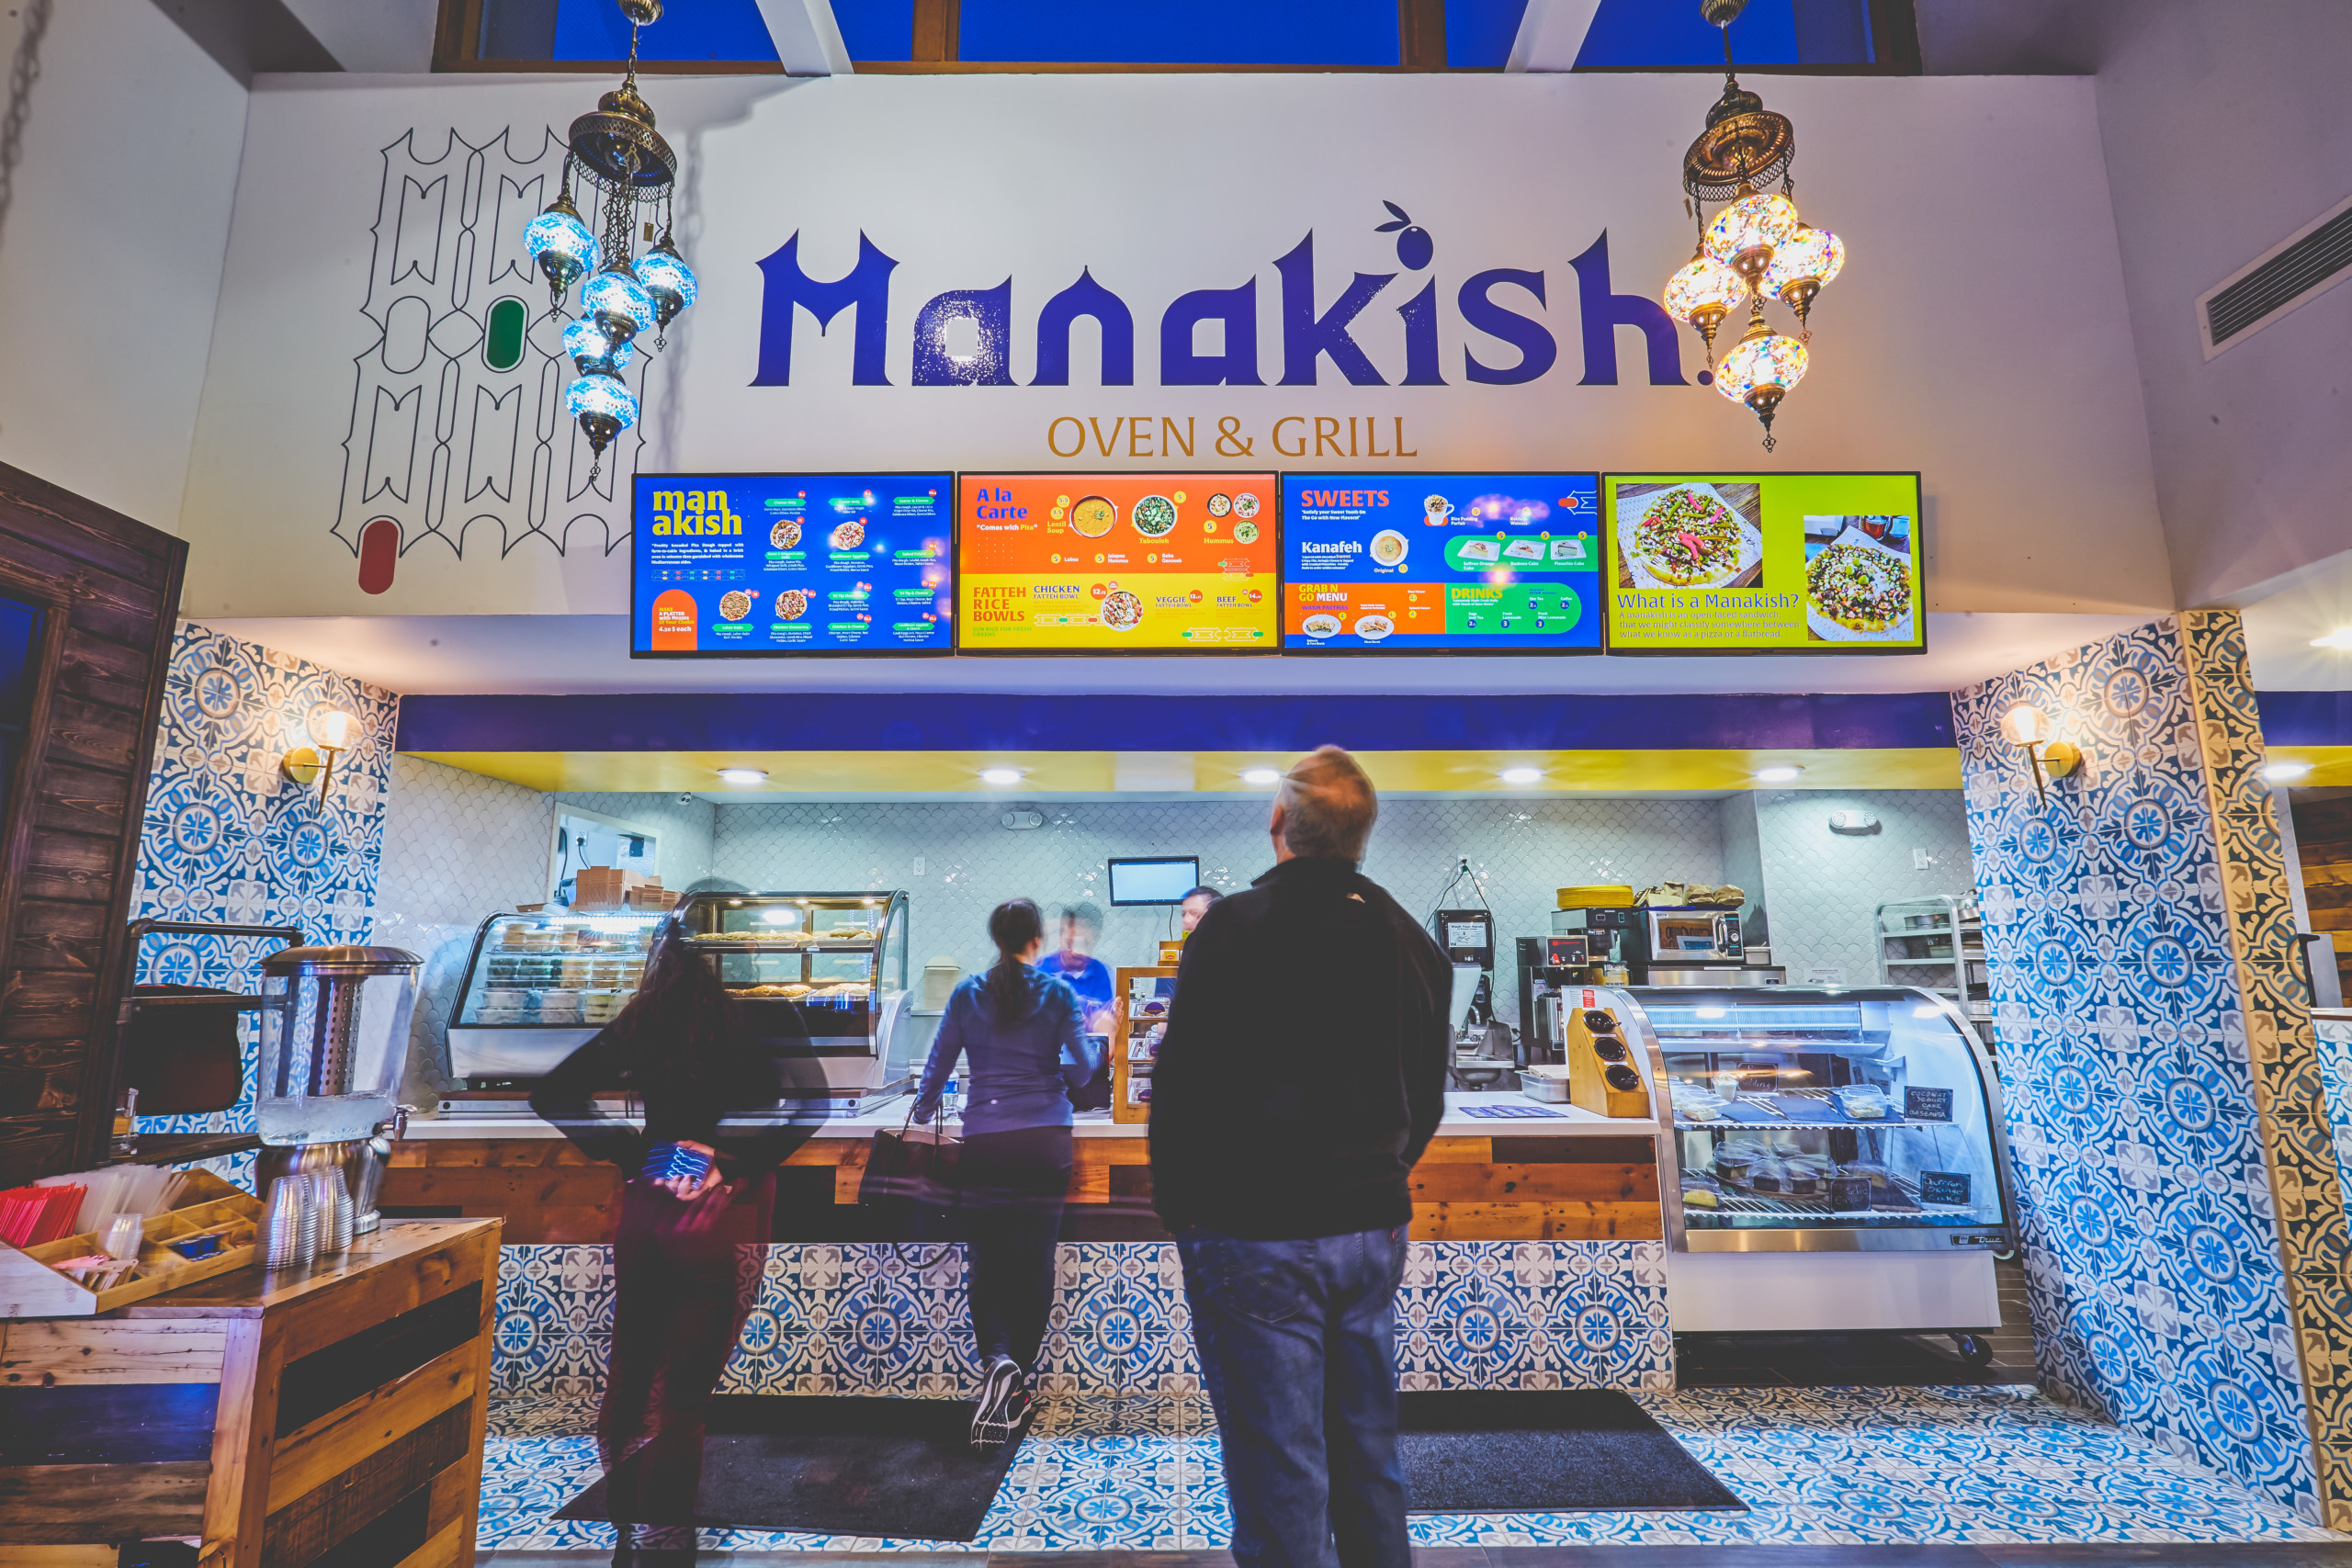 Manakish Oven and Grill Interior